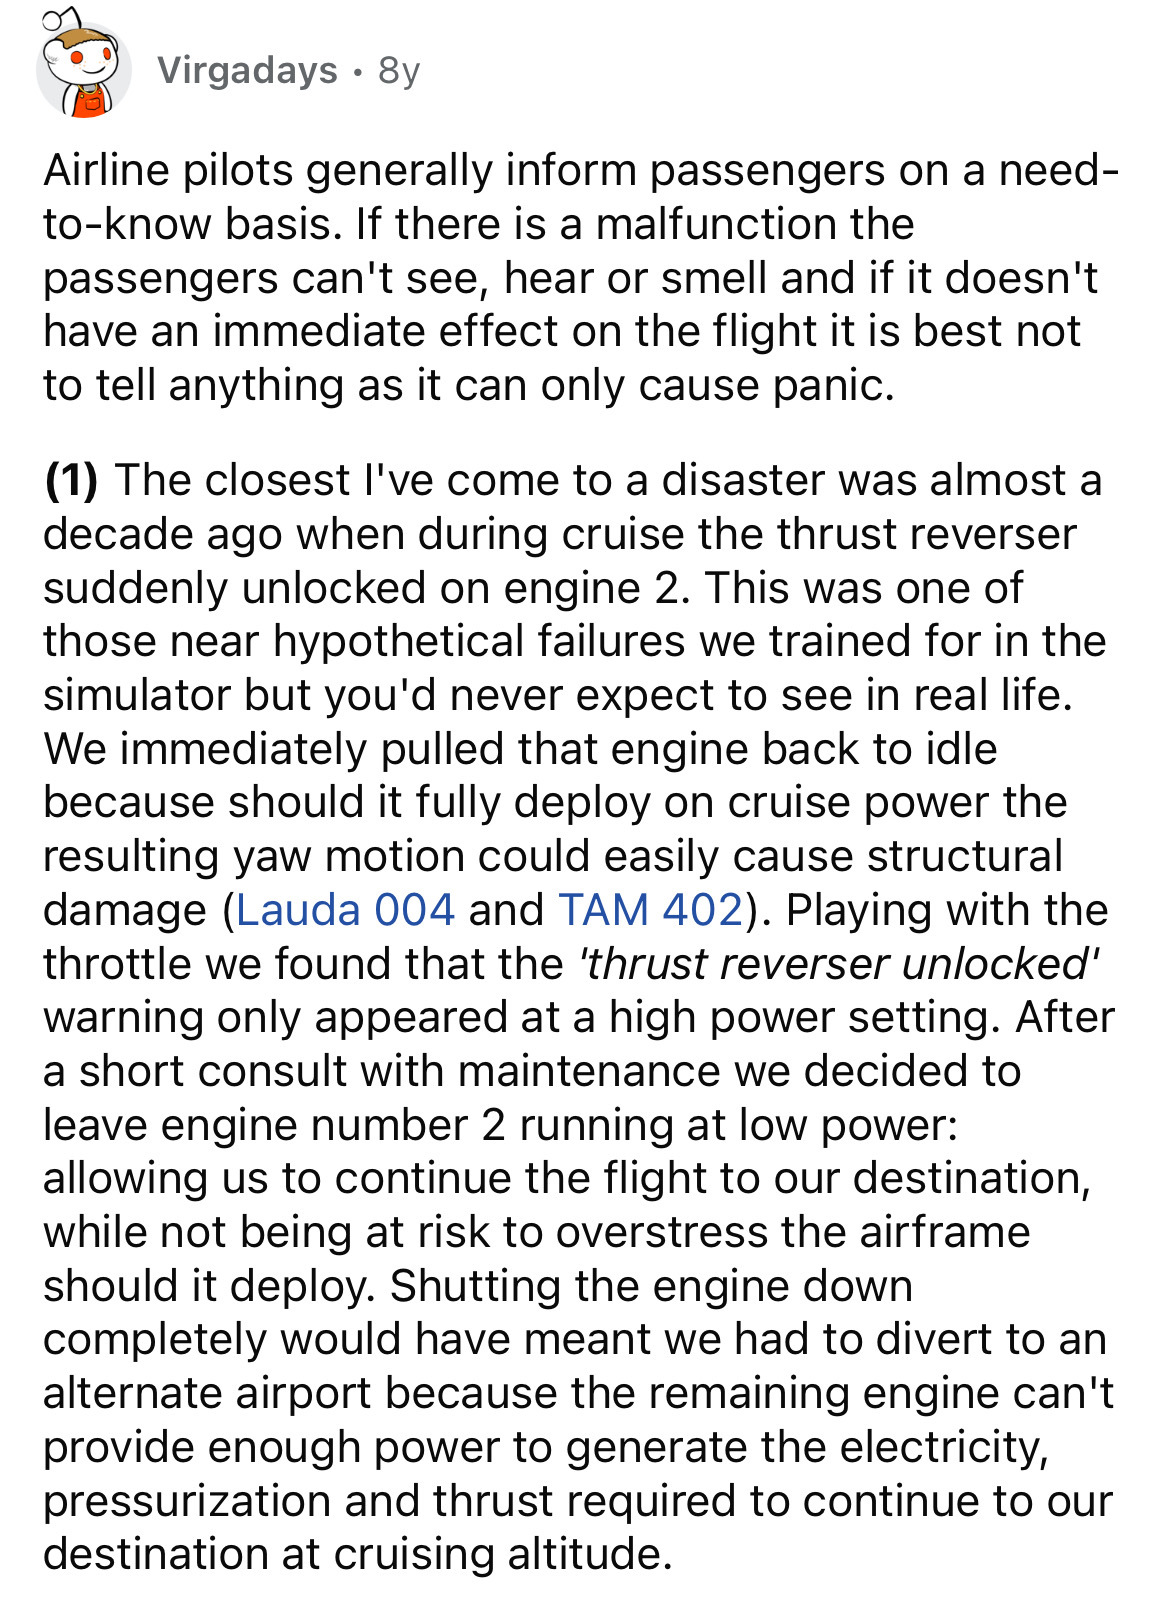 document - Virgadays. By Airline pilots generally inform passengers on a need toknow basis. If there is a malfunction the passengers can't see, hear or smell and if it doesn't have an immediate effect on the flight it is best not to tell anything as it ca